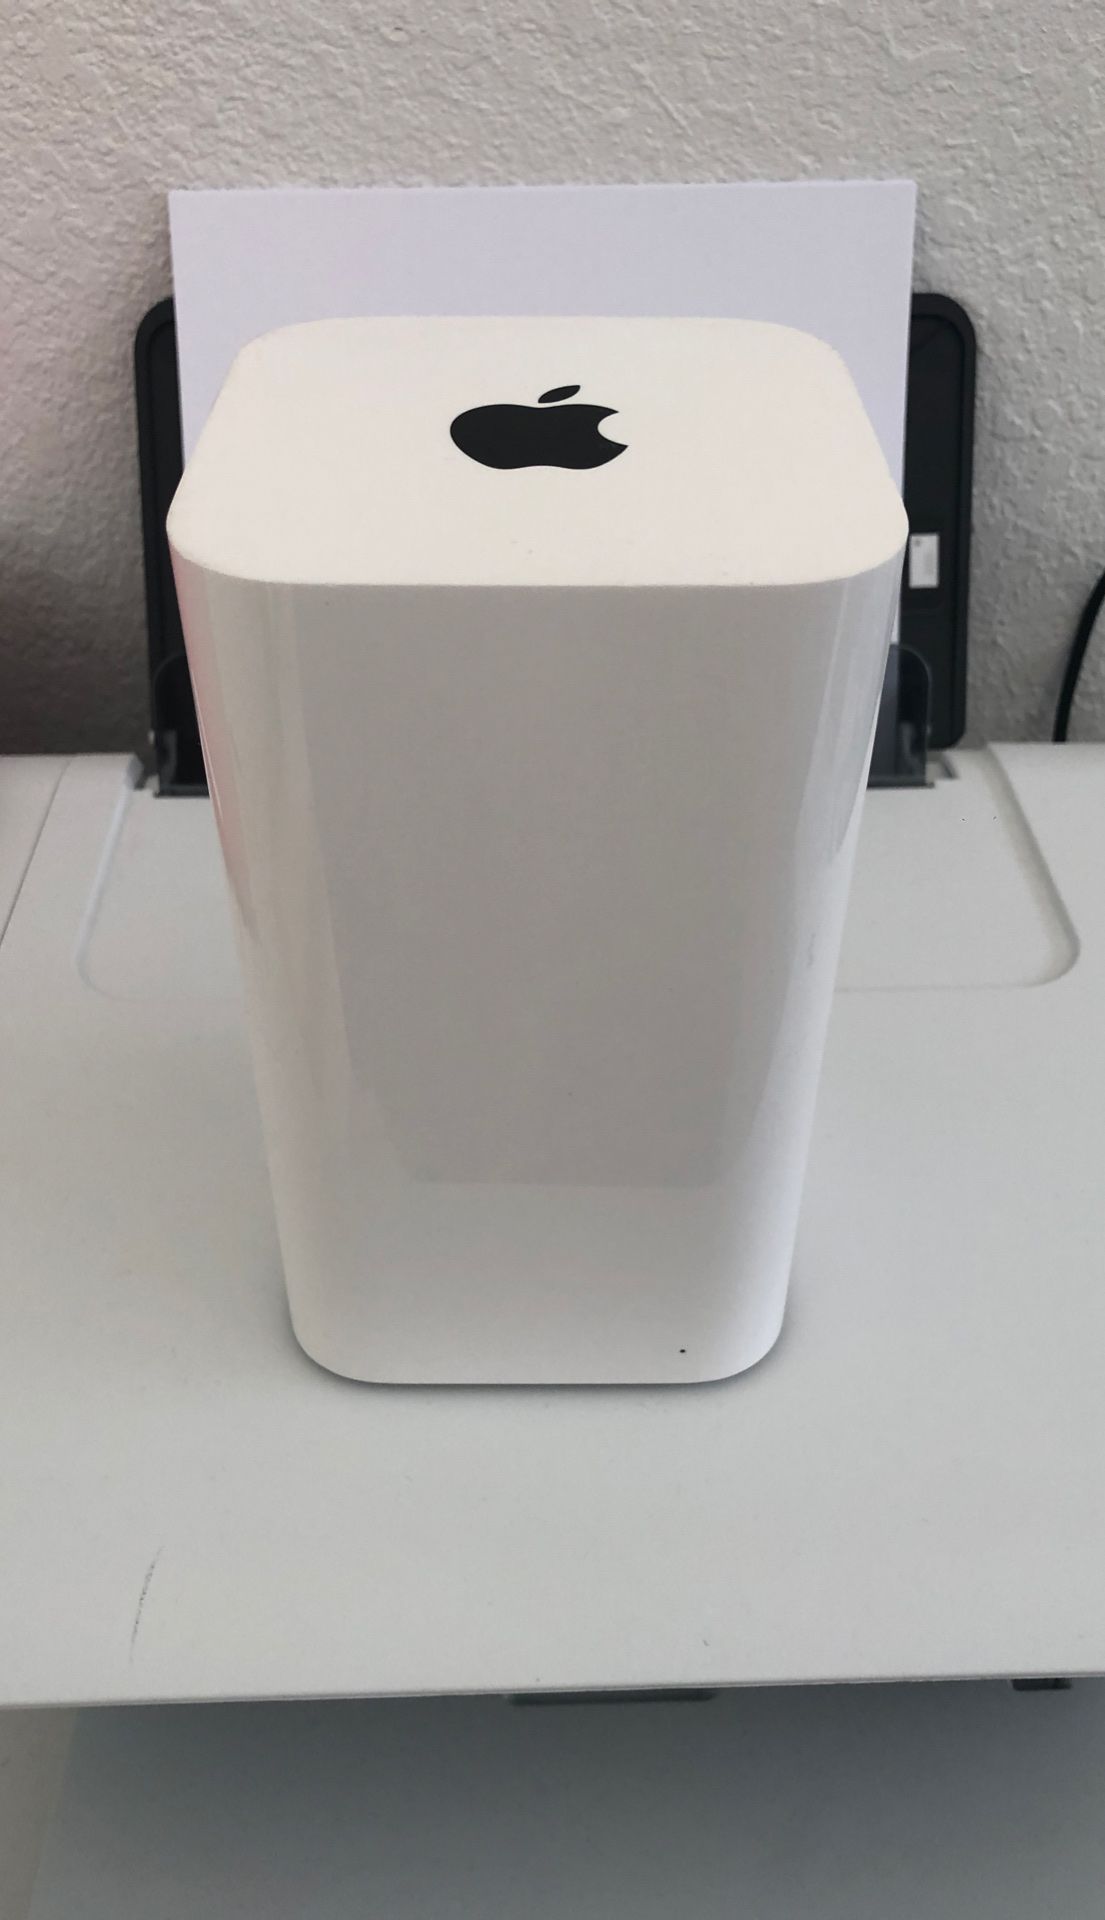 Apple Airport Time Capsule Model A1470 EMC 2635 Router